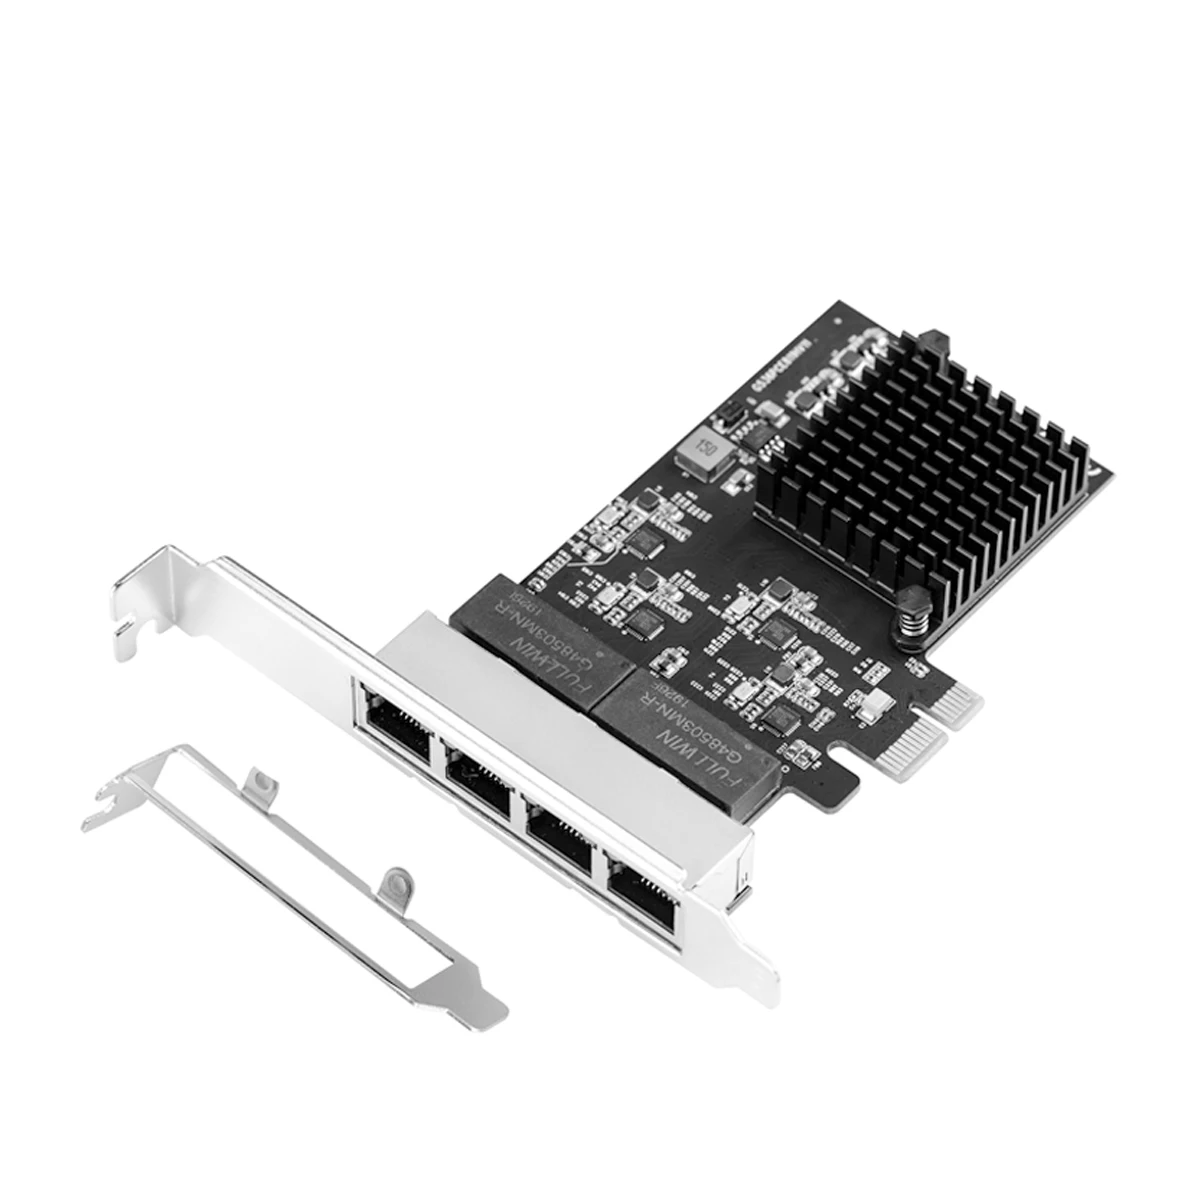 Wired Network Card PCI Express to 4 port 1000 Mbps Gigabit Ethernet PCIe 1G LAN NIC rtl8111 chip with low profile bracket